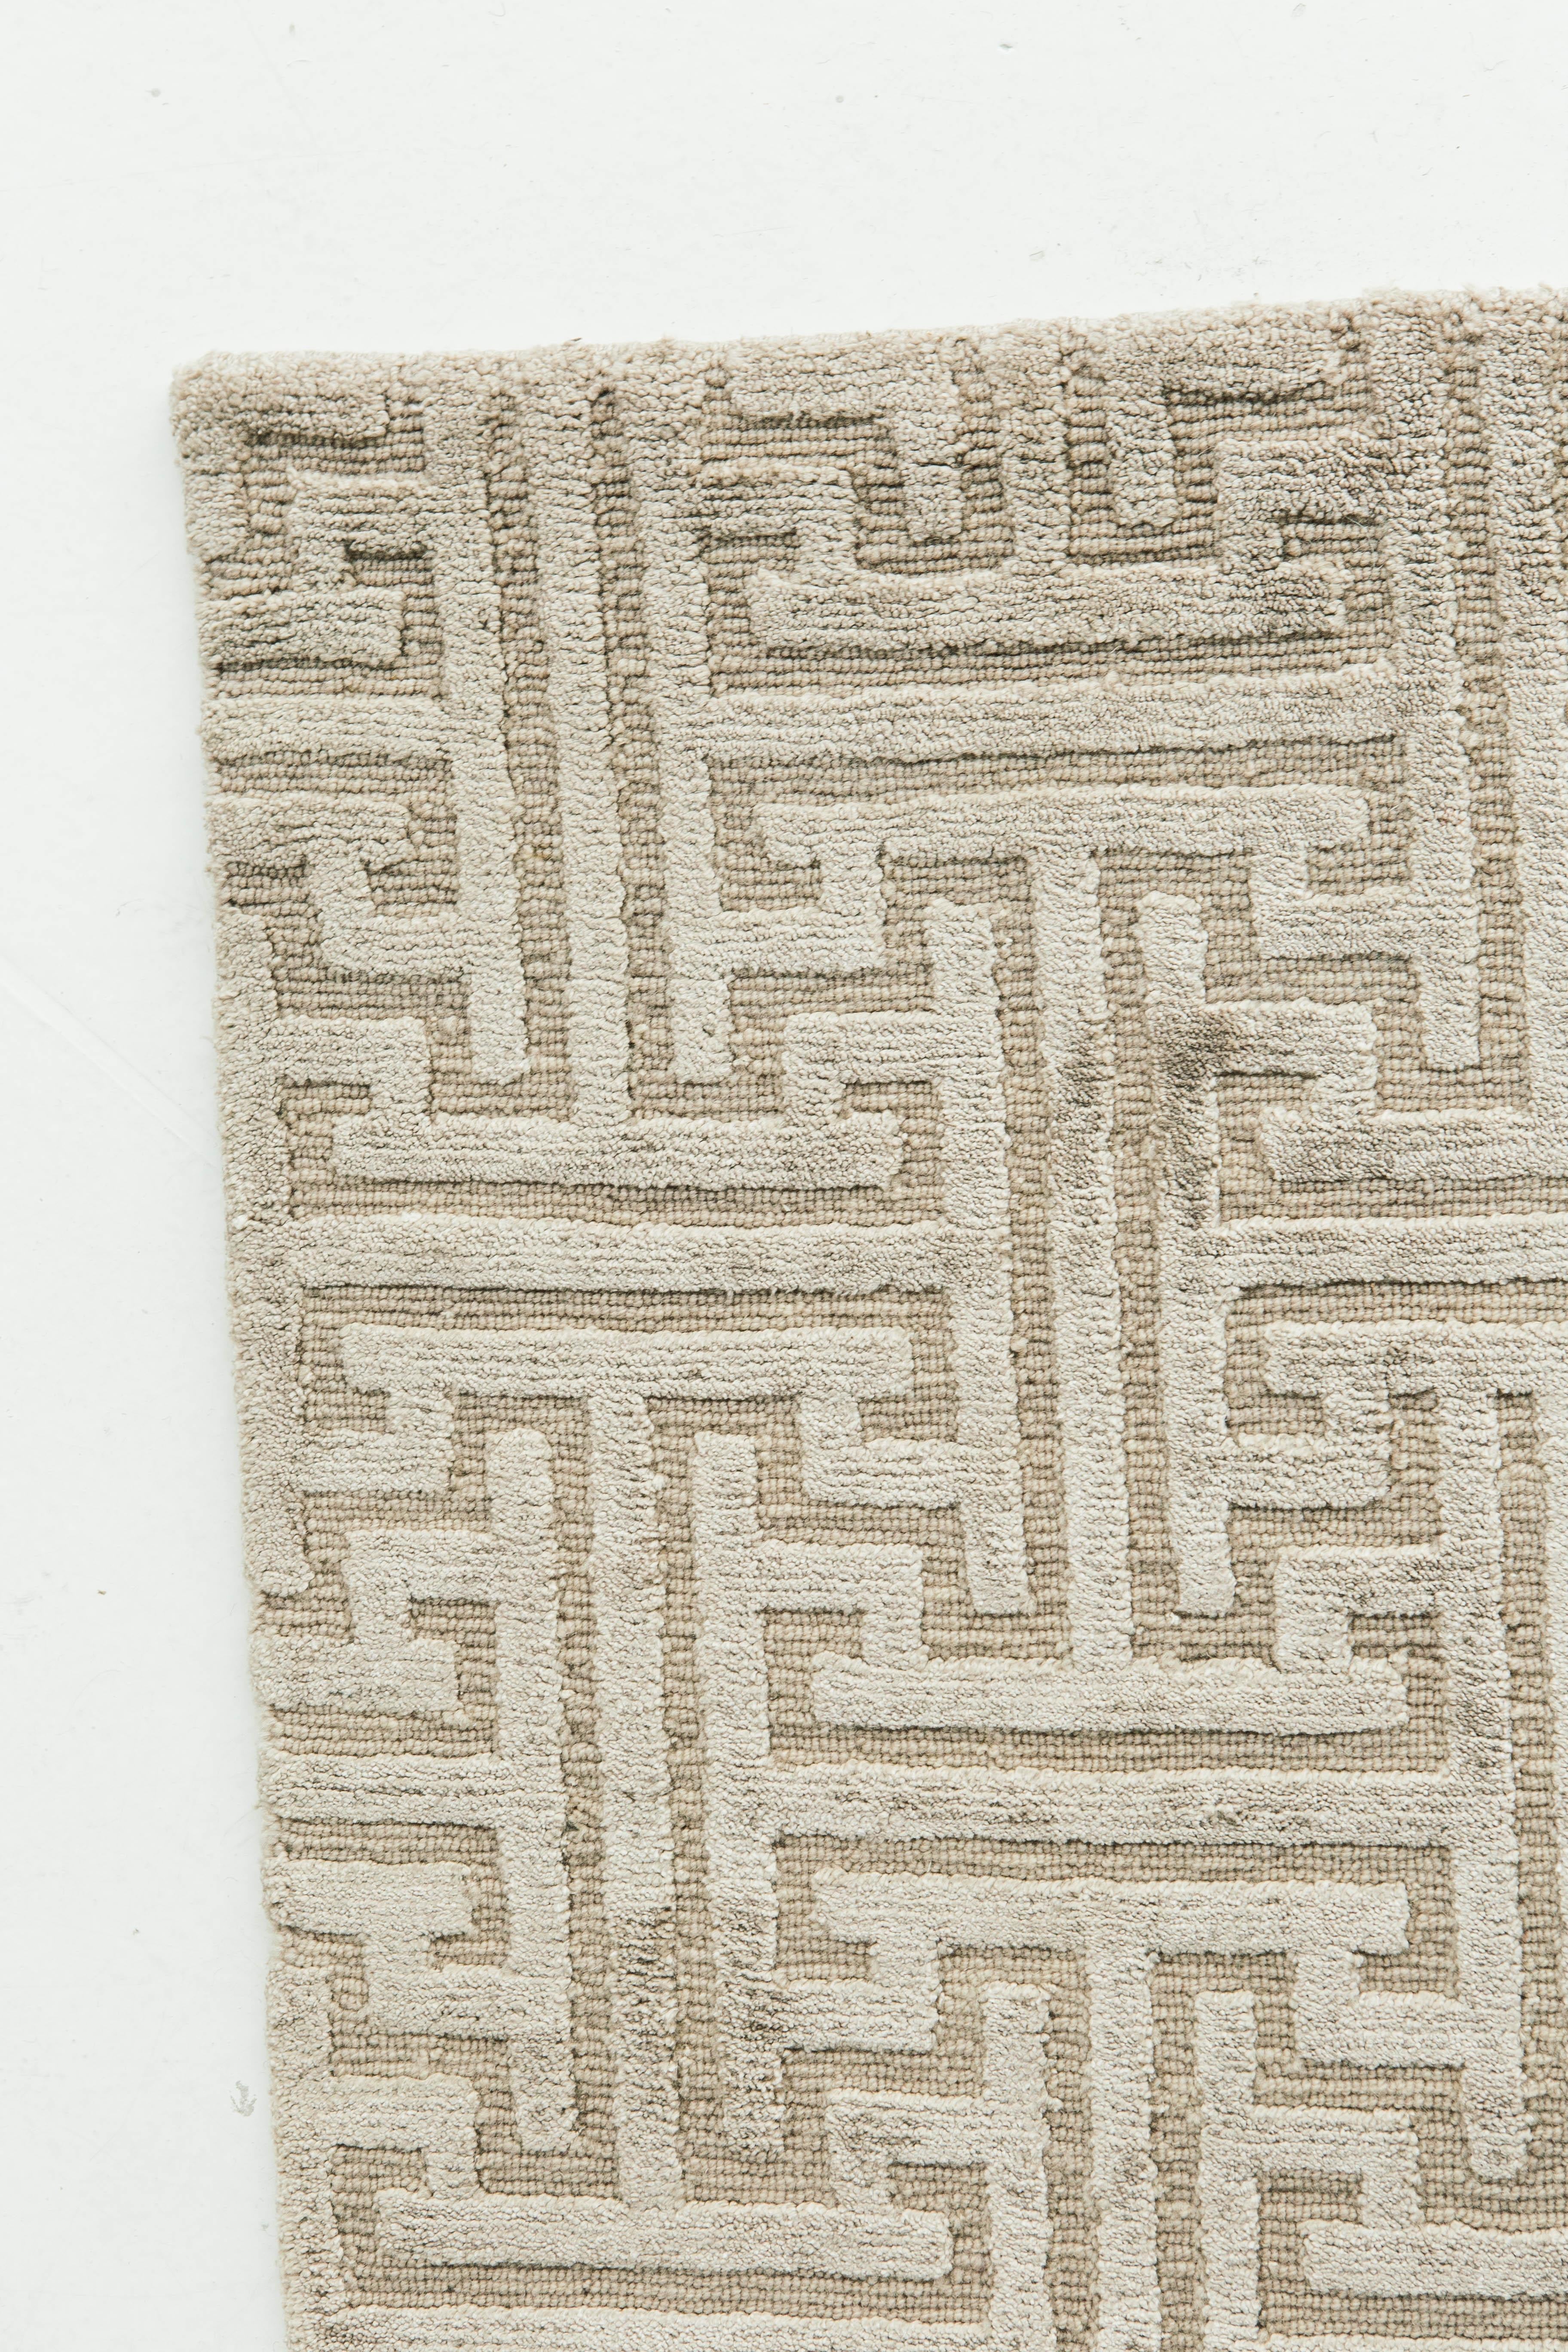 'Greeky' is a gorgeous embossed bamboo silk rug. The rug's texture and interlocking line pattern is sophisticated and chic at the same time. This rug from our Elan collection will elevate any design space.


Rug number 25125
Size: 9' 0